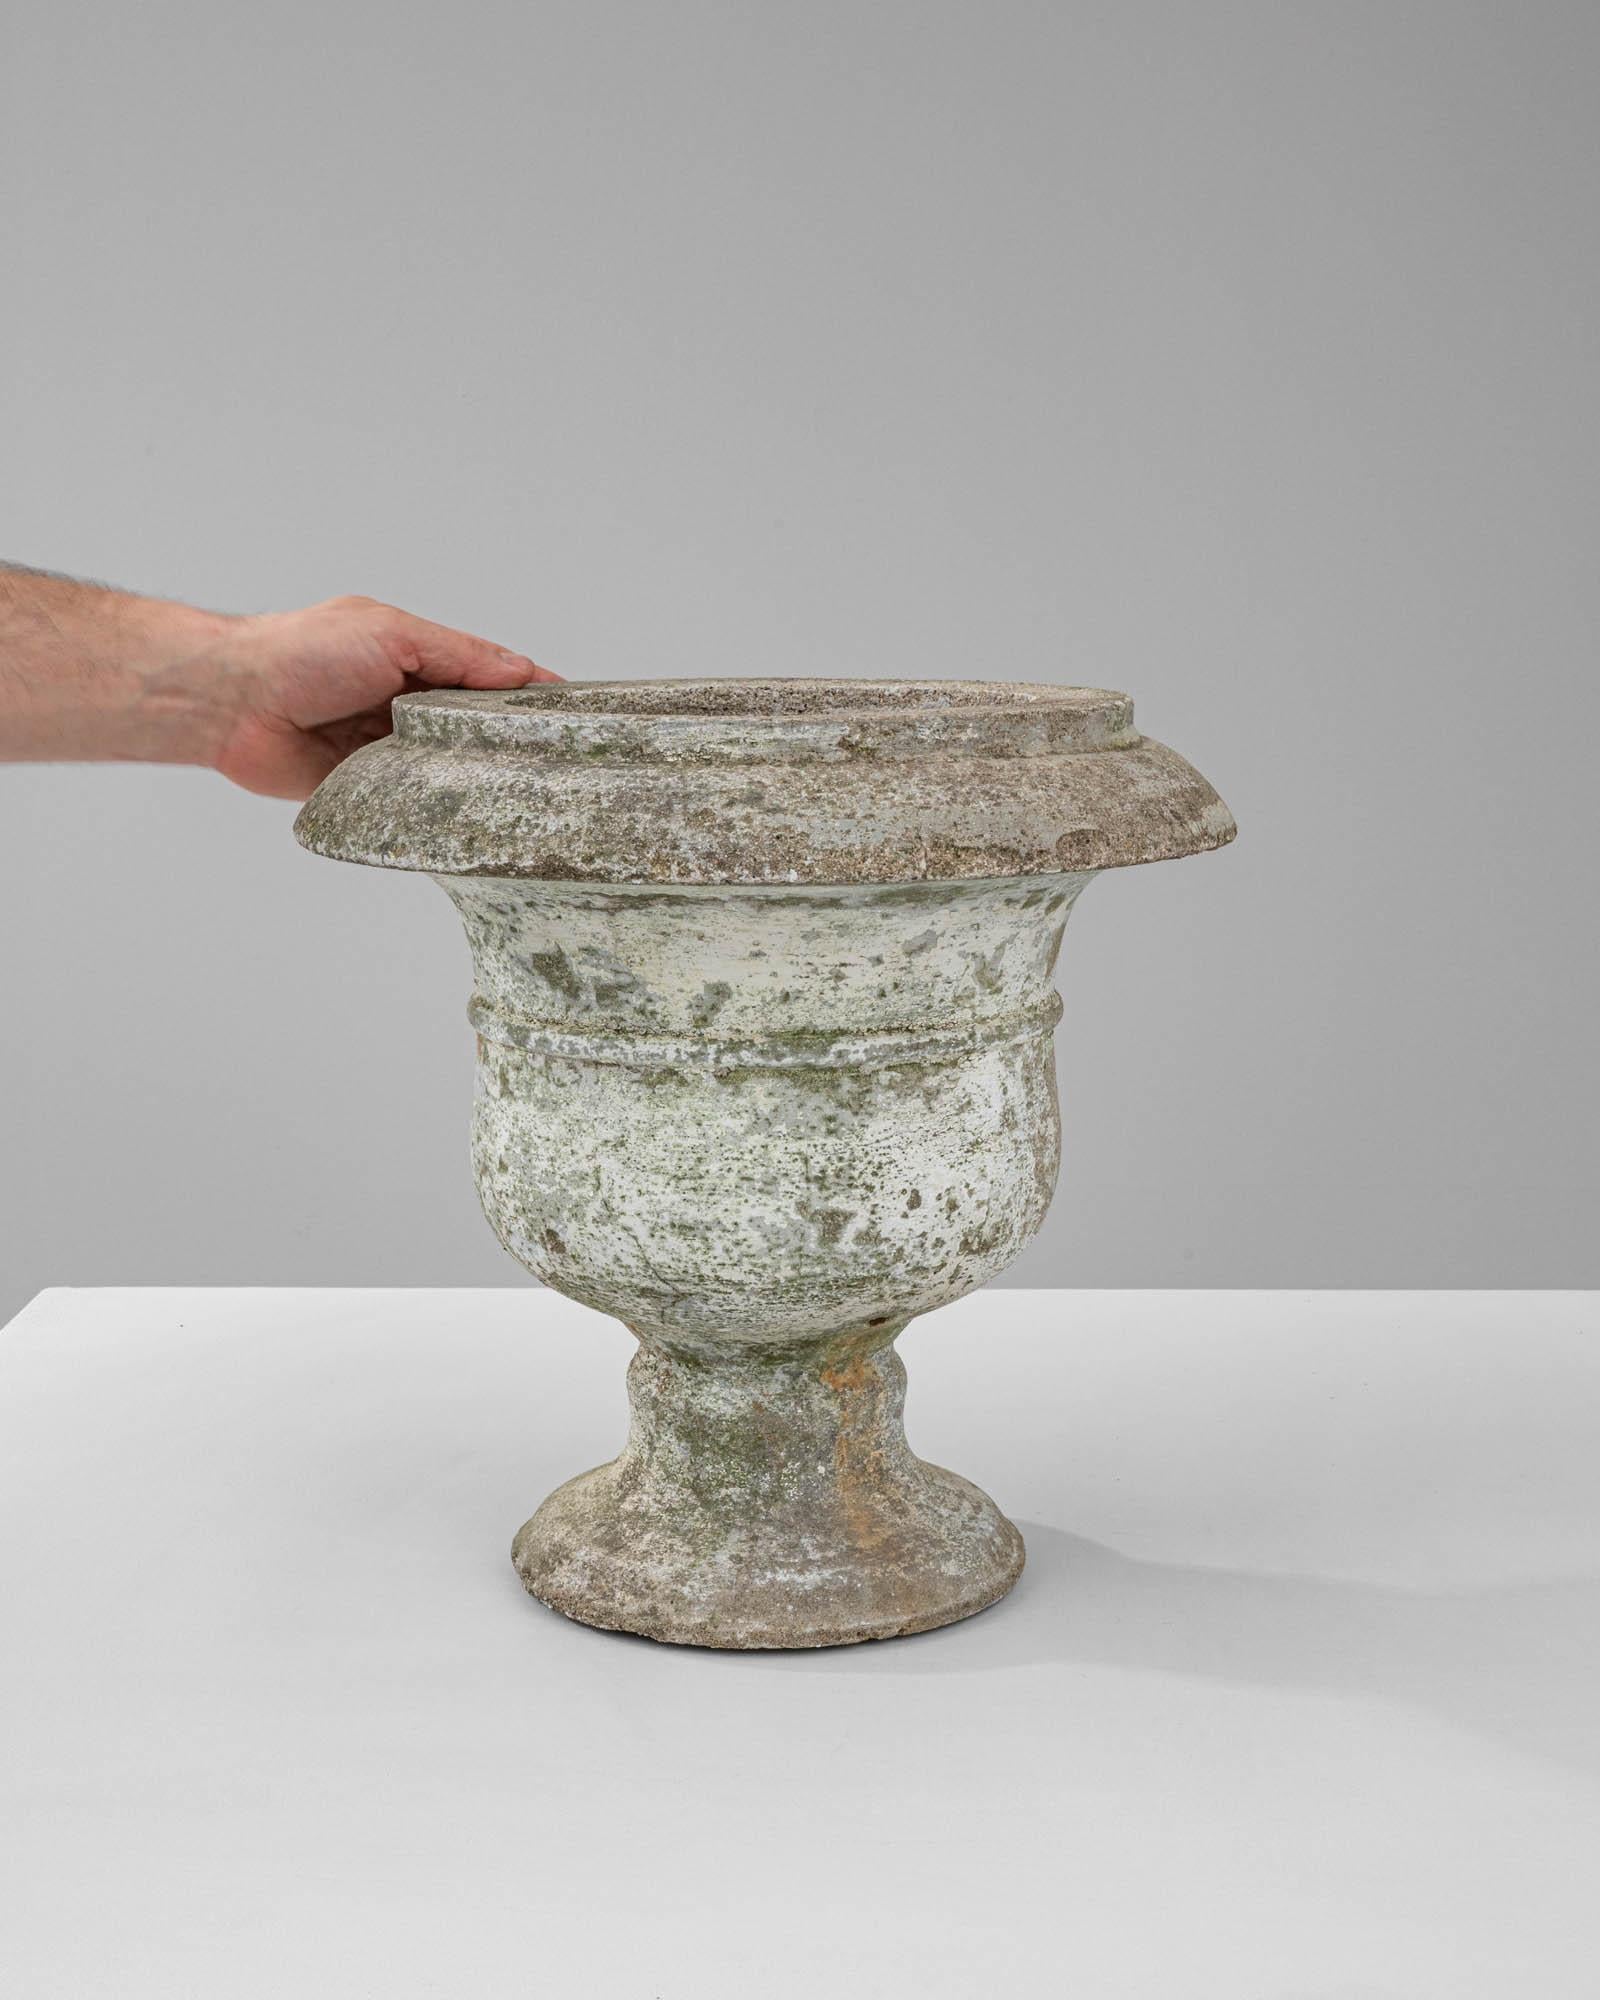 Step into the past with this exquisite 20th-century French concrete planter, a piece rich in history and texture. The planter's grand, classical urn shape, complete with a flared rim and robust pedestal base, offers an air of formality and grandeur